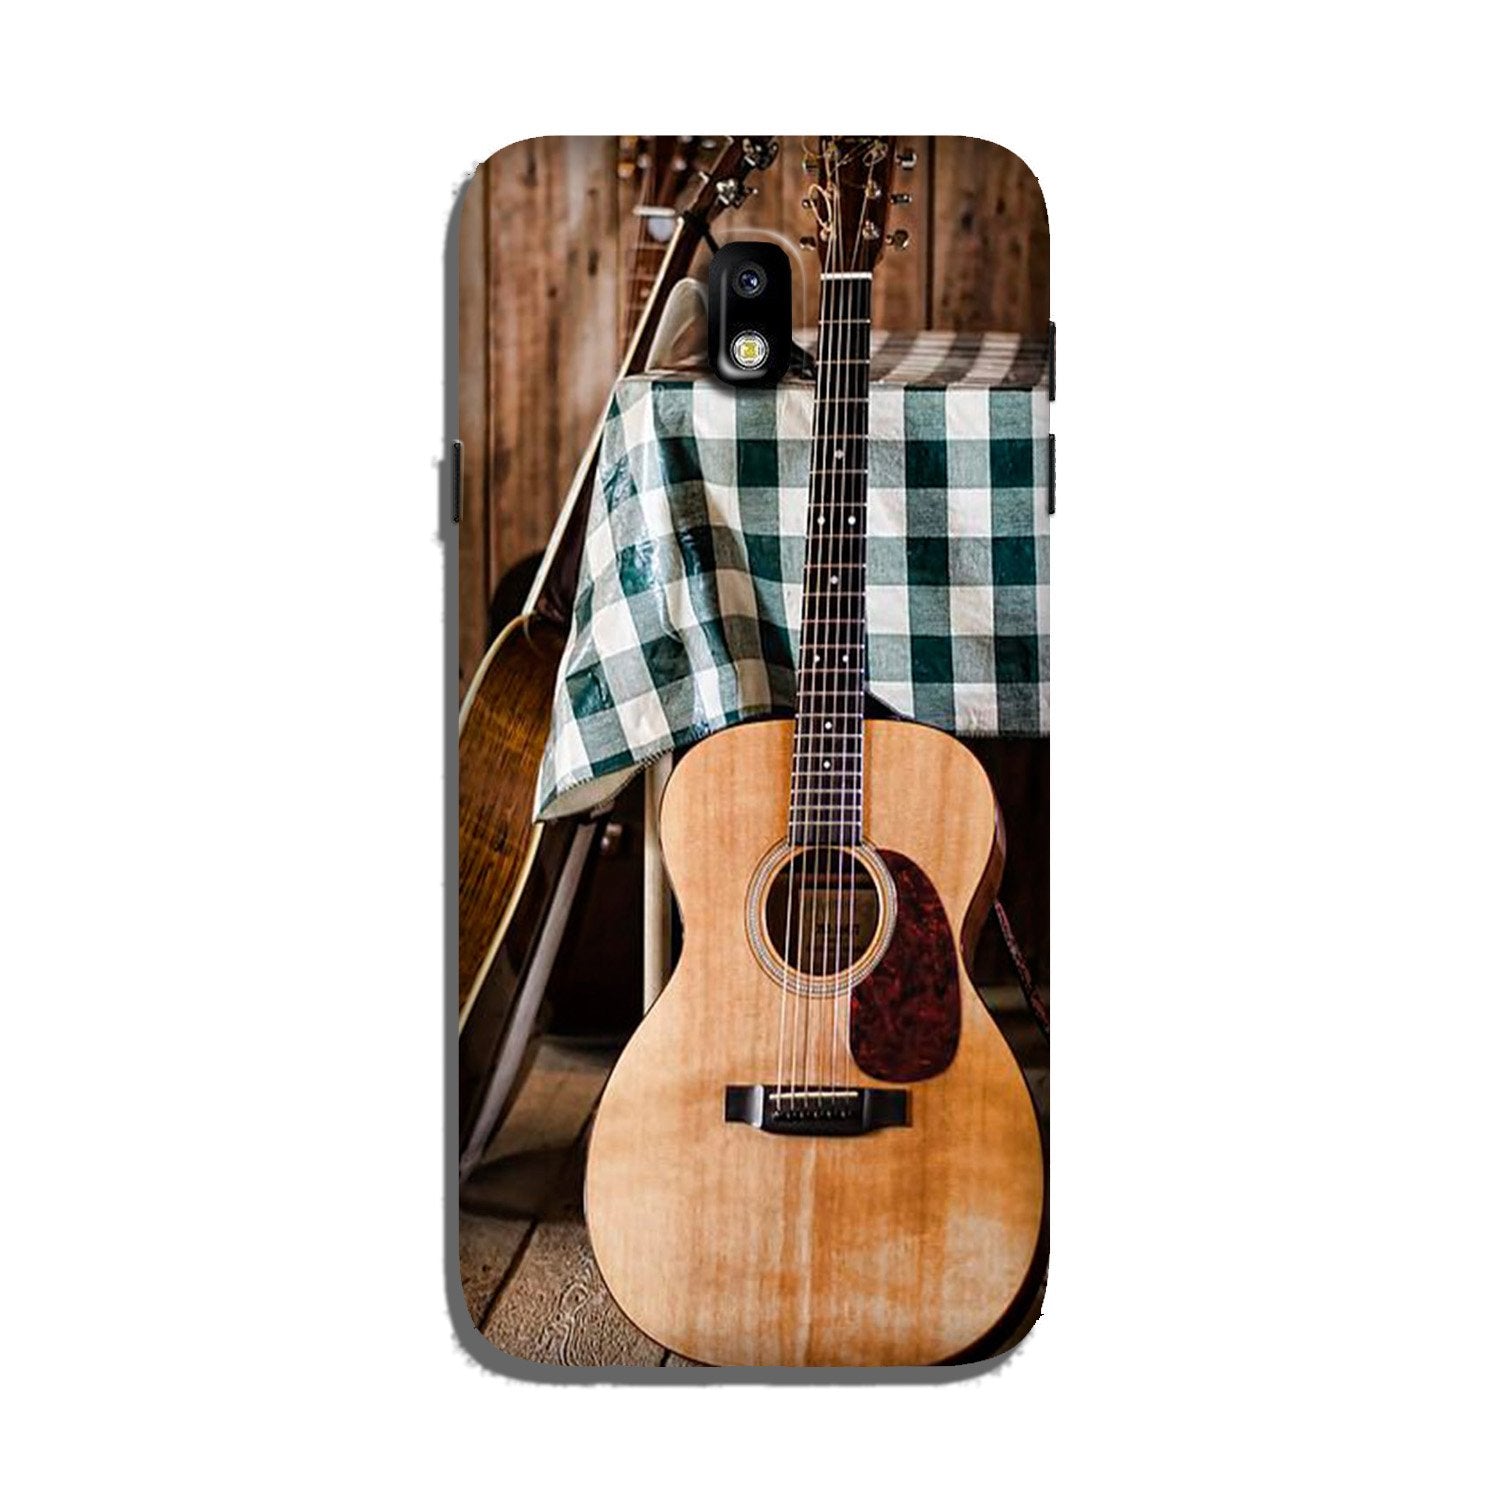 Guitar2 Case for Galaxy J7 Pro